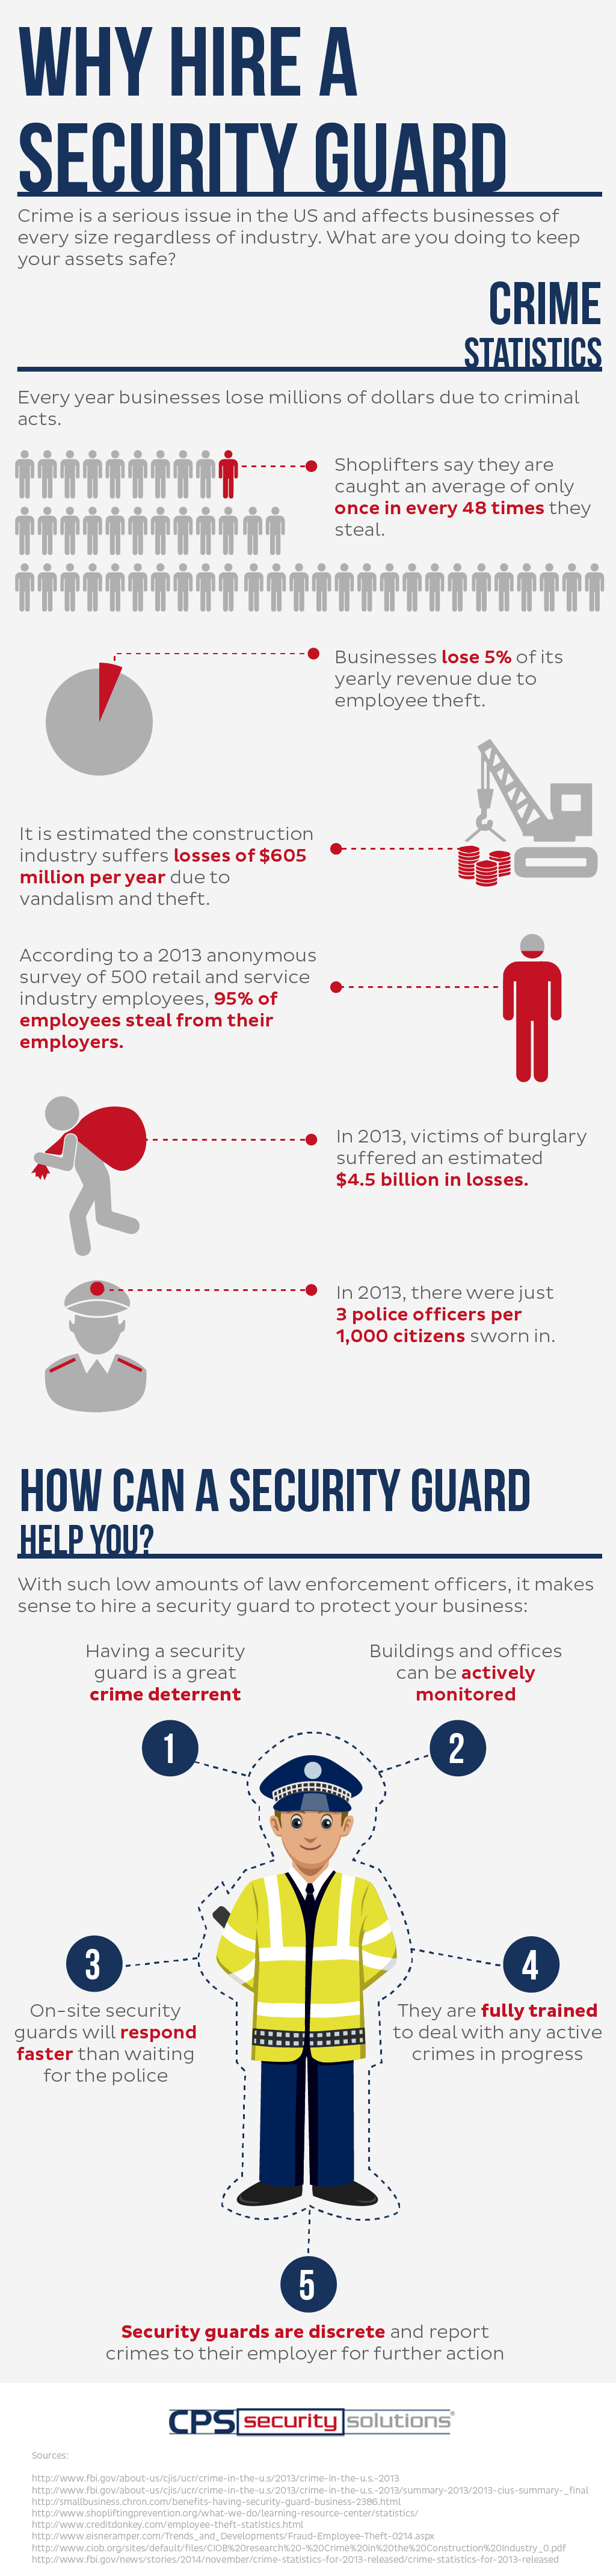 Are You Investing Enough Money In Security? 